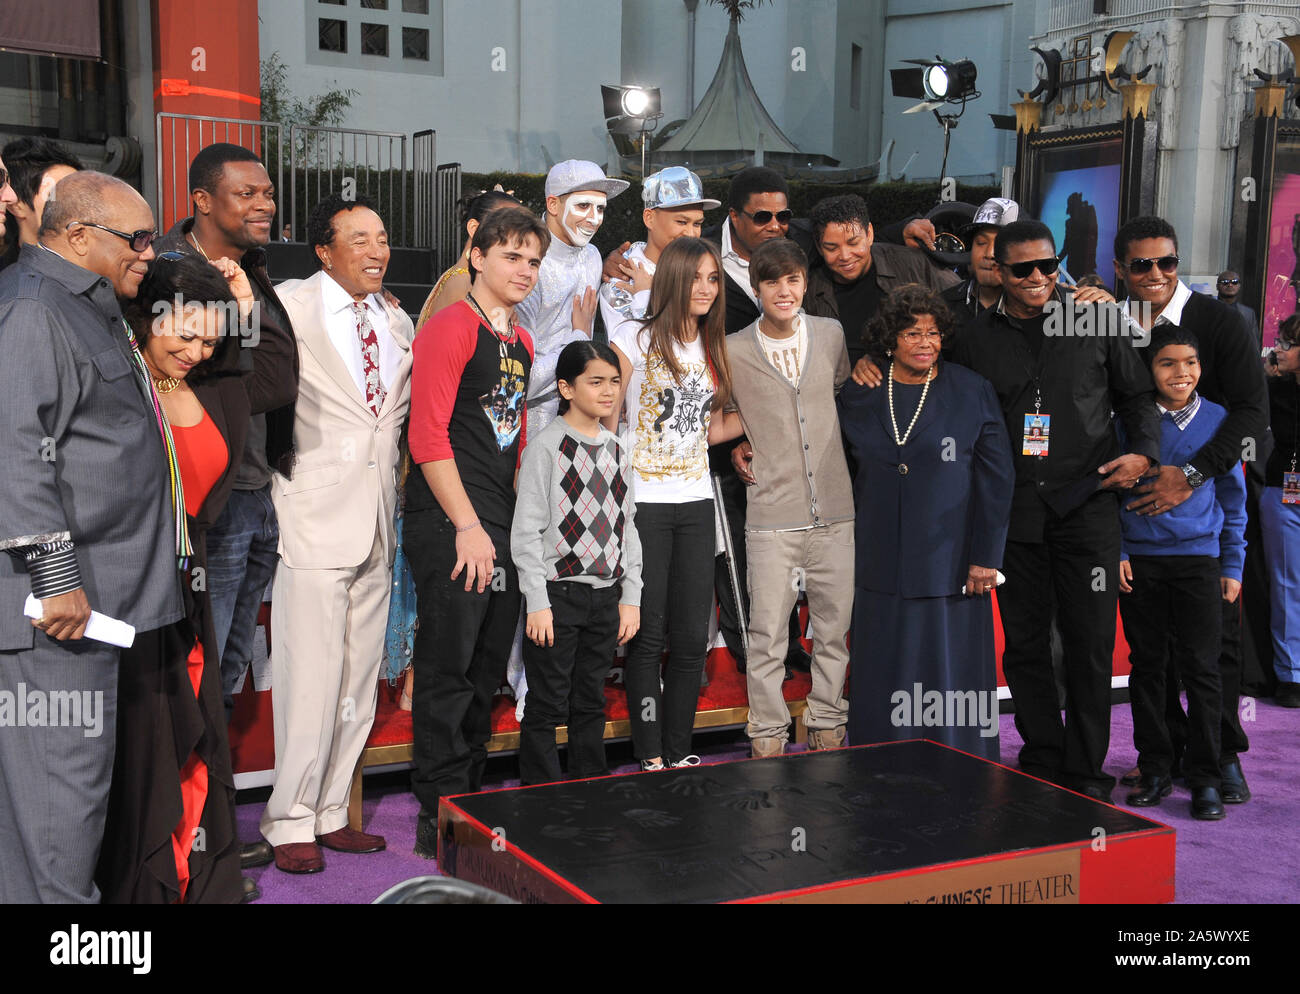 LOS ANGELES, CA. January 26, 2012: Michael Jackson's children Prince Michael, Paris & Prince Michael II 'Blanket' with their grandmother Katherine Jackson & singer Justin Bieber, Smikey Robinson, Quincy Jones & Tito Jackson on Hollywood Boulevard where they placed their father's hand & footprints, using his shoes & glove, in cement in the courtyard of the Grauman's Chinese Theatre. Cirque du Soleil's new show 'Michael Jackson THE IMMORTAL World Tour' premieres in Los Angeles tomorrow. © 2012 Paul Smith / Featureflash Stock Photo